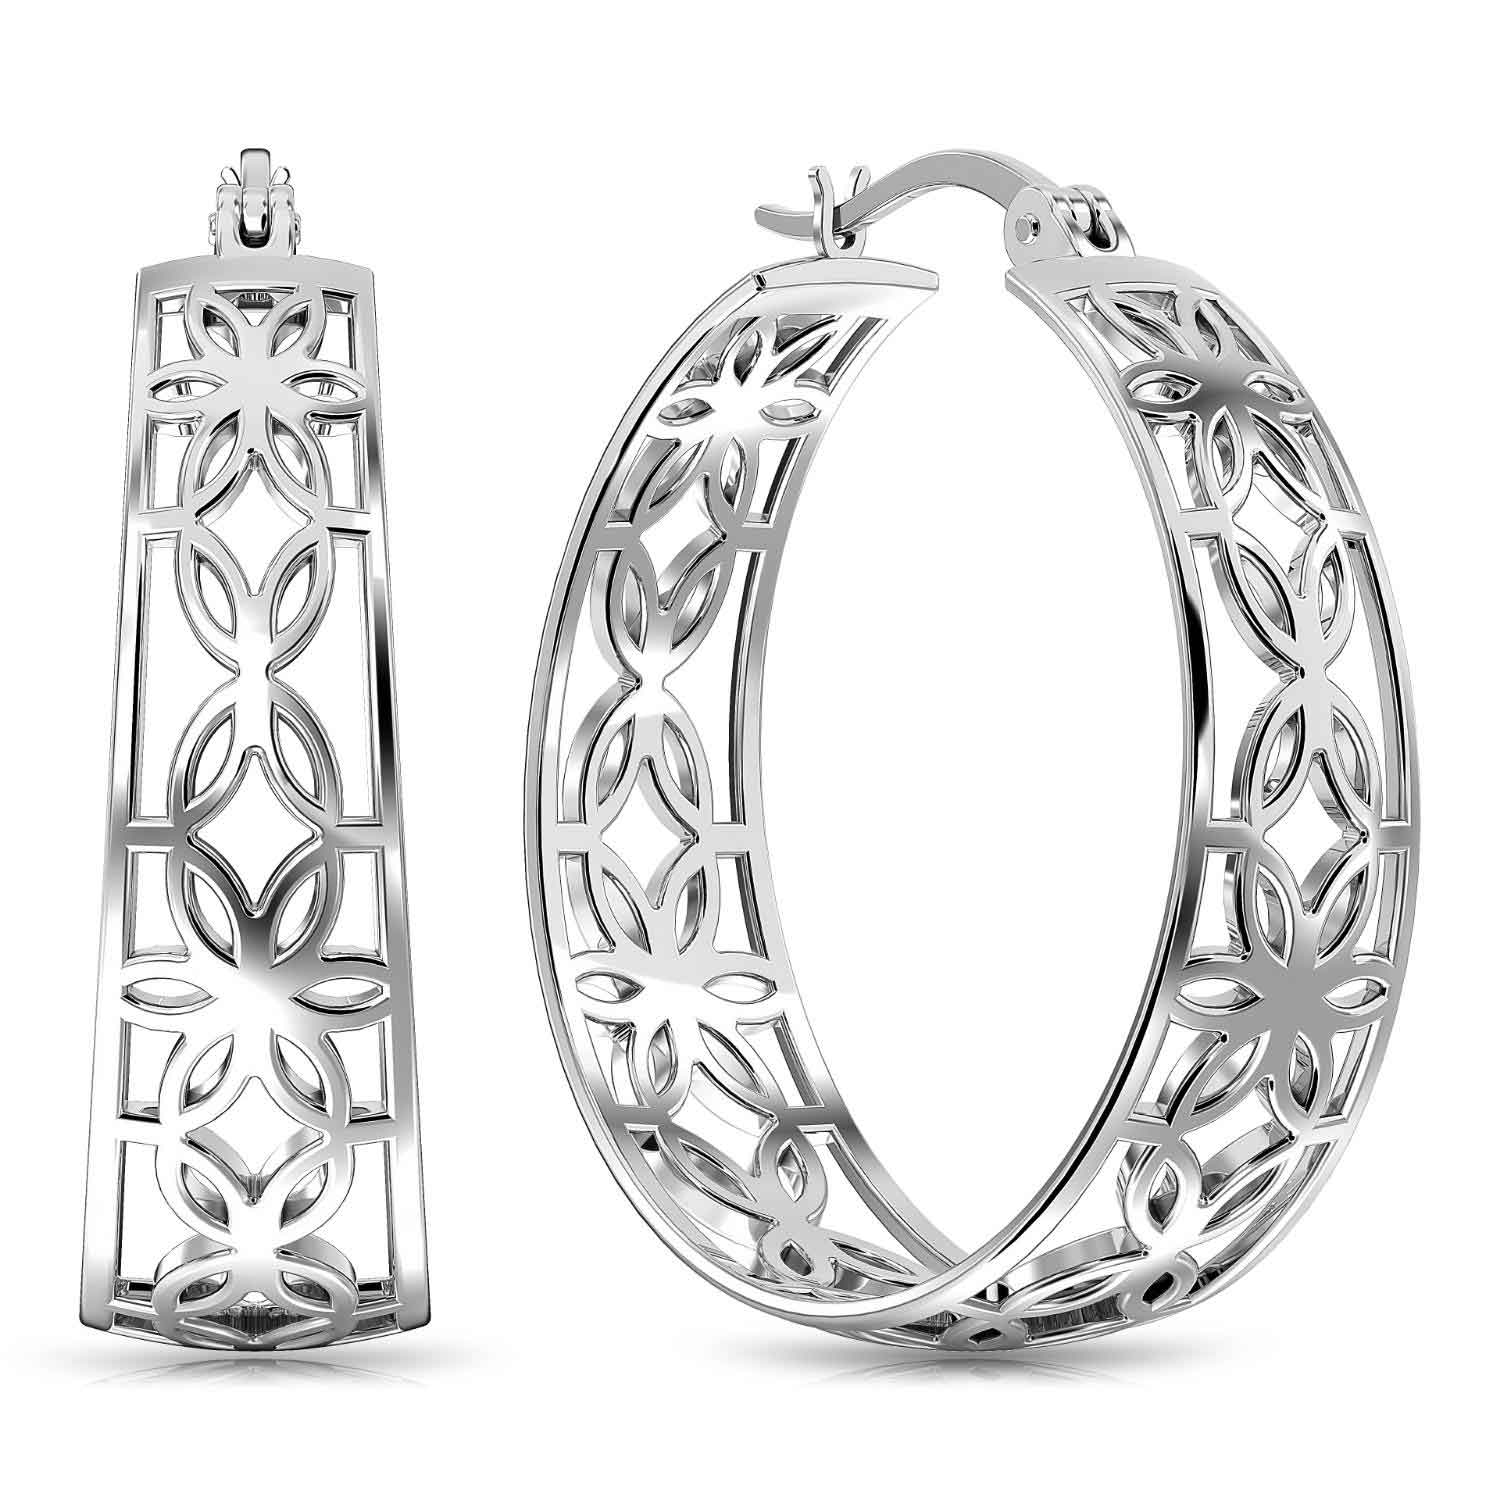 925 Sterling Silver Small Floral Filigree Hypoallergenic Round Shape Intricate Cutout Design Click-Top Hoop Earrings for Women